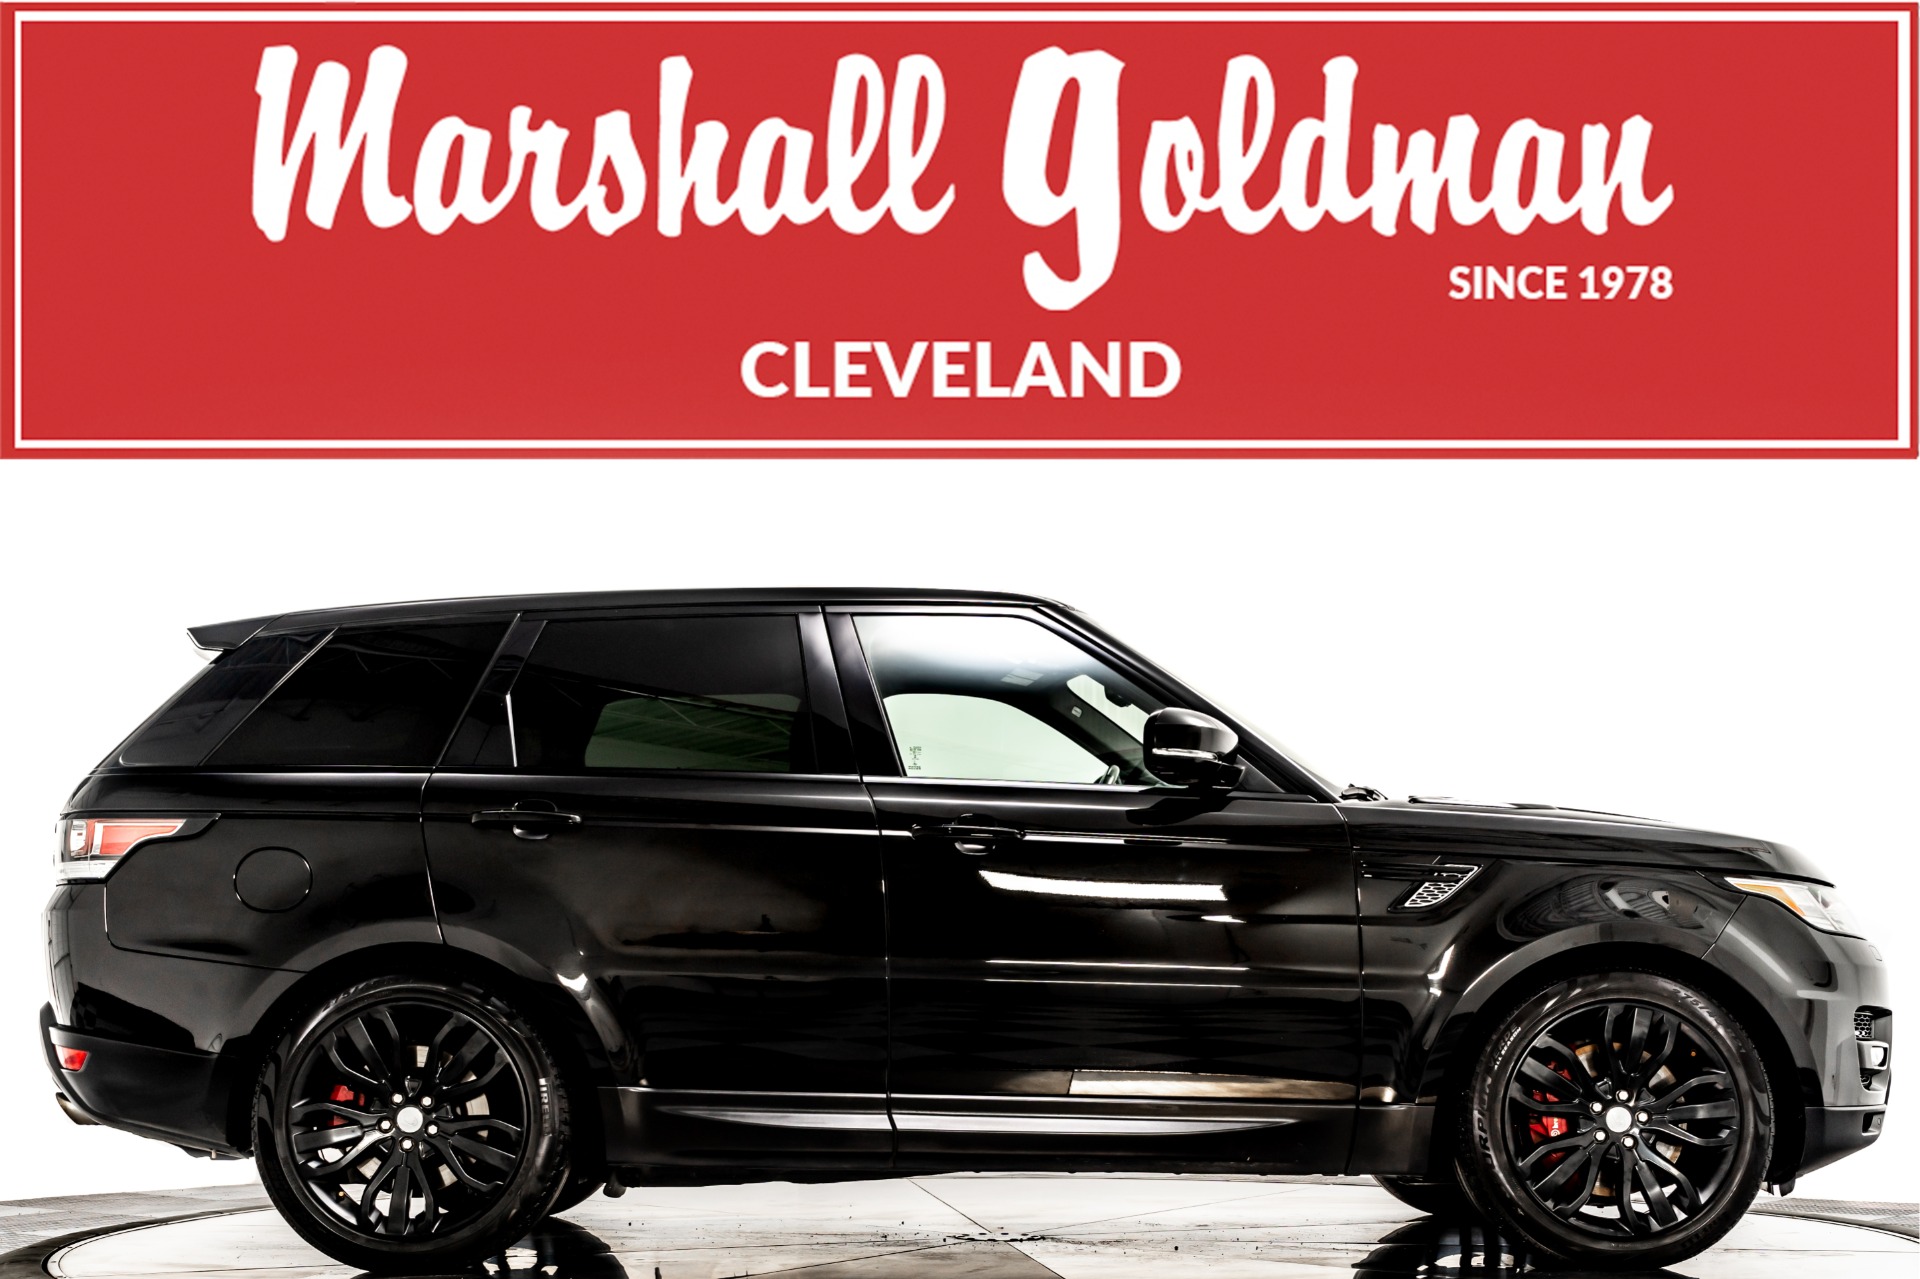 Ontaarden Storen zij is Used 2016 Land Rover Range Rover Sport Supercharged Dynamic For Sale (Sold)  | Marshall Goldman Motor Sales Stock #W22433